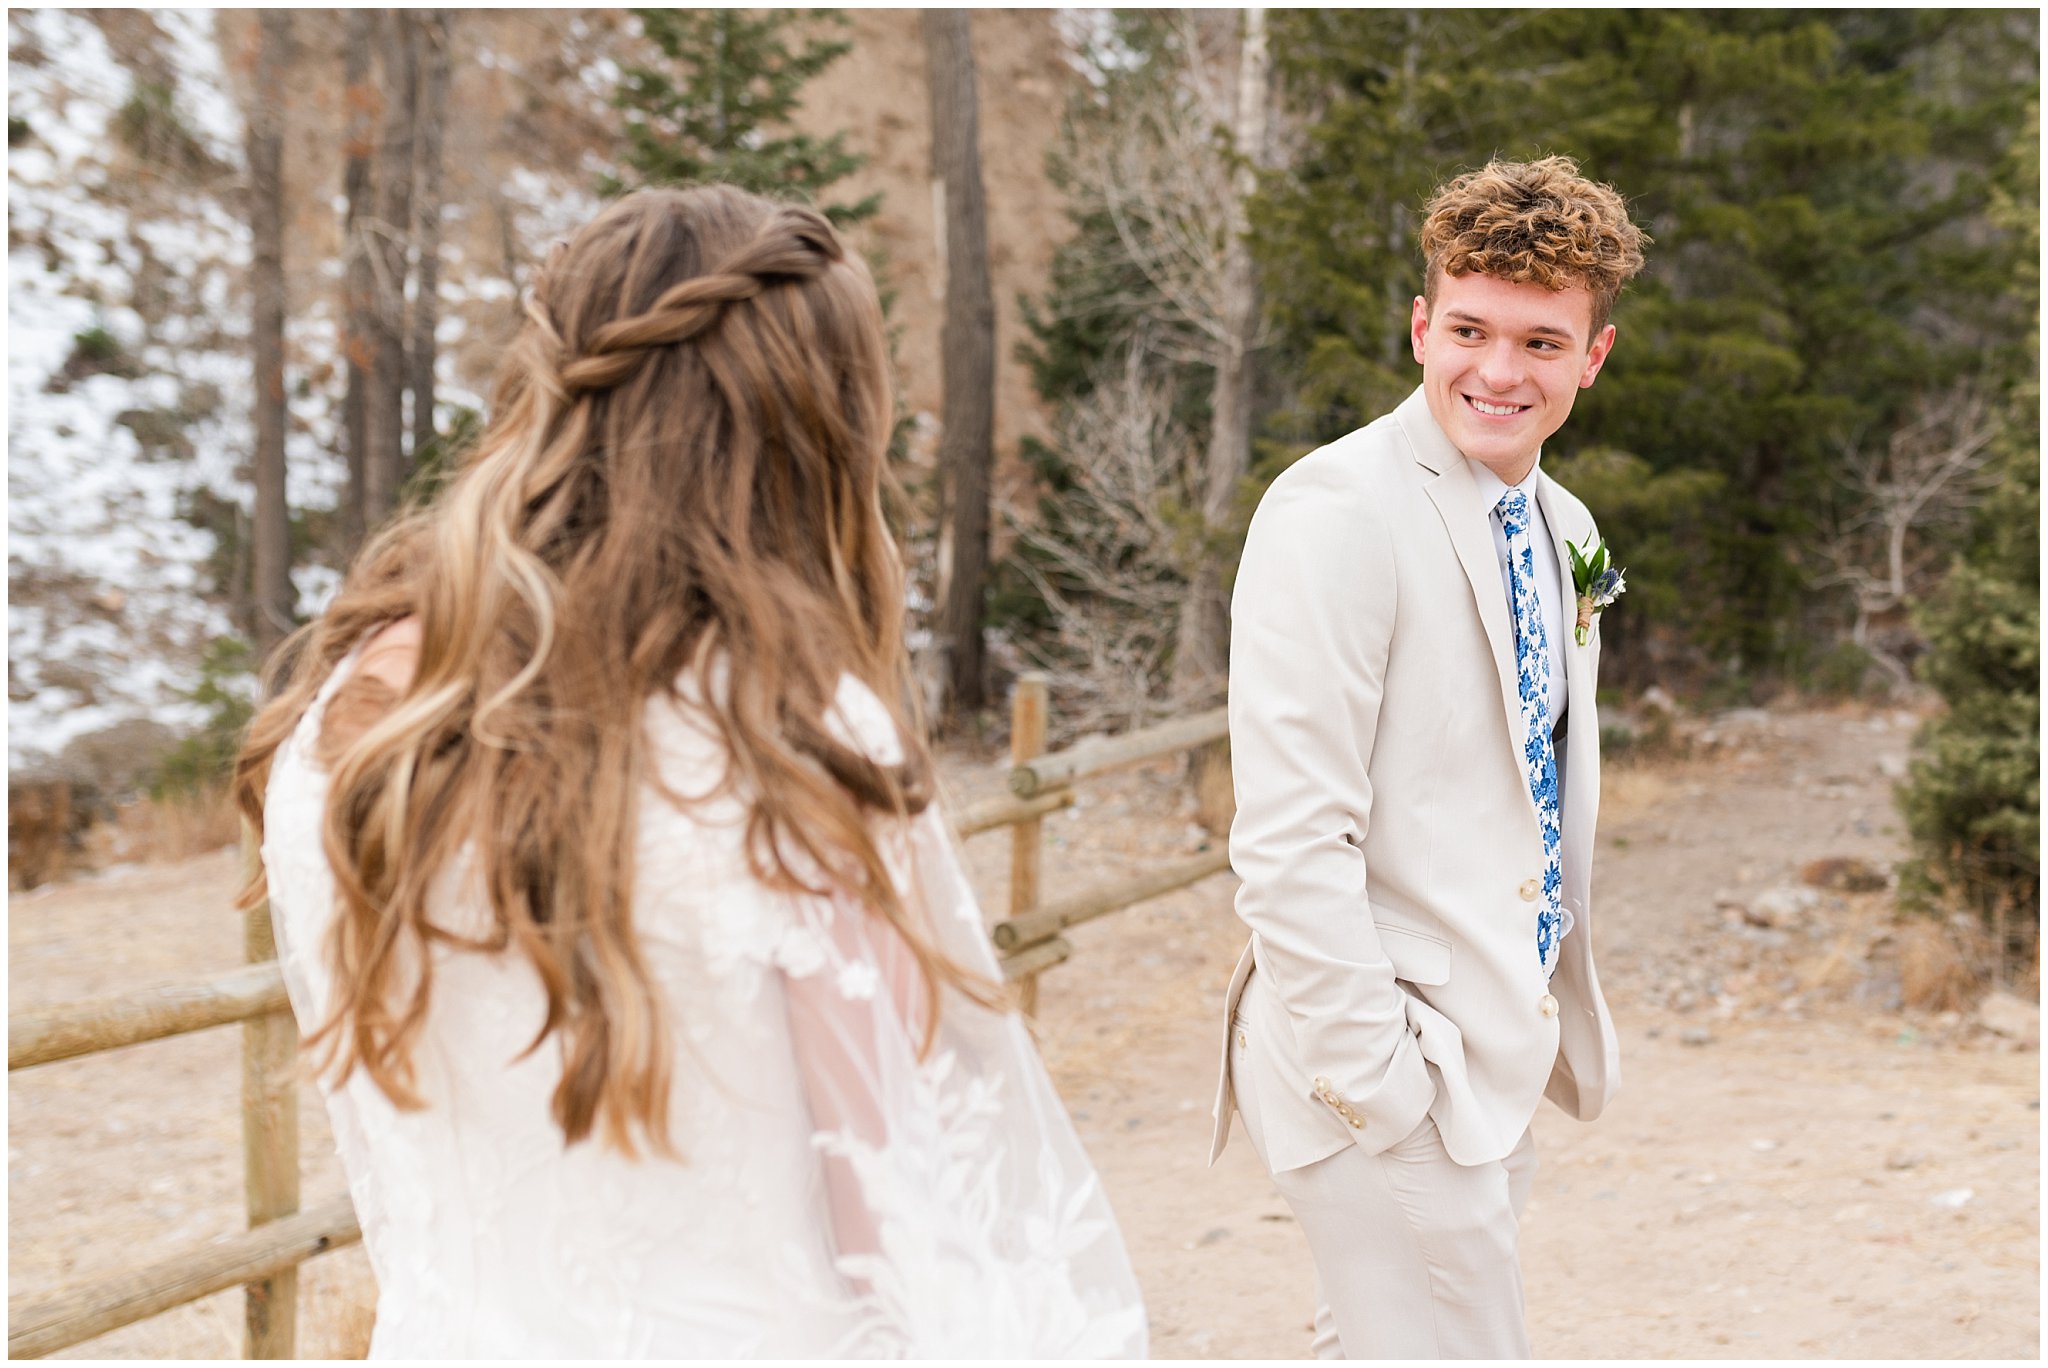 Bride and groom in the mountains during their first look wearing lace dress with veil and white floral bouquet and creme colored suit with blue tie | Tibble Fork Winter Formal Session | Jessie and Dallin Photography